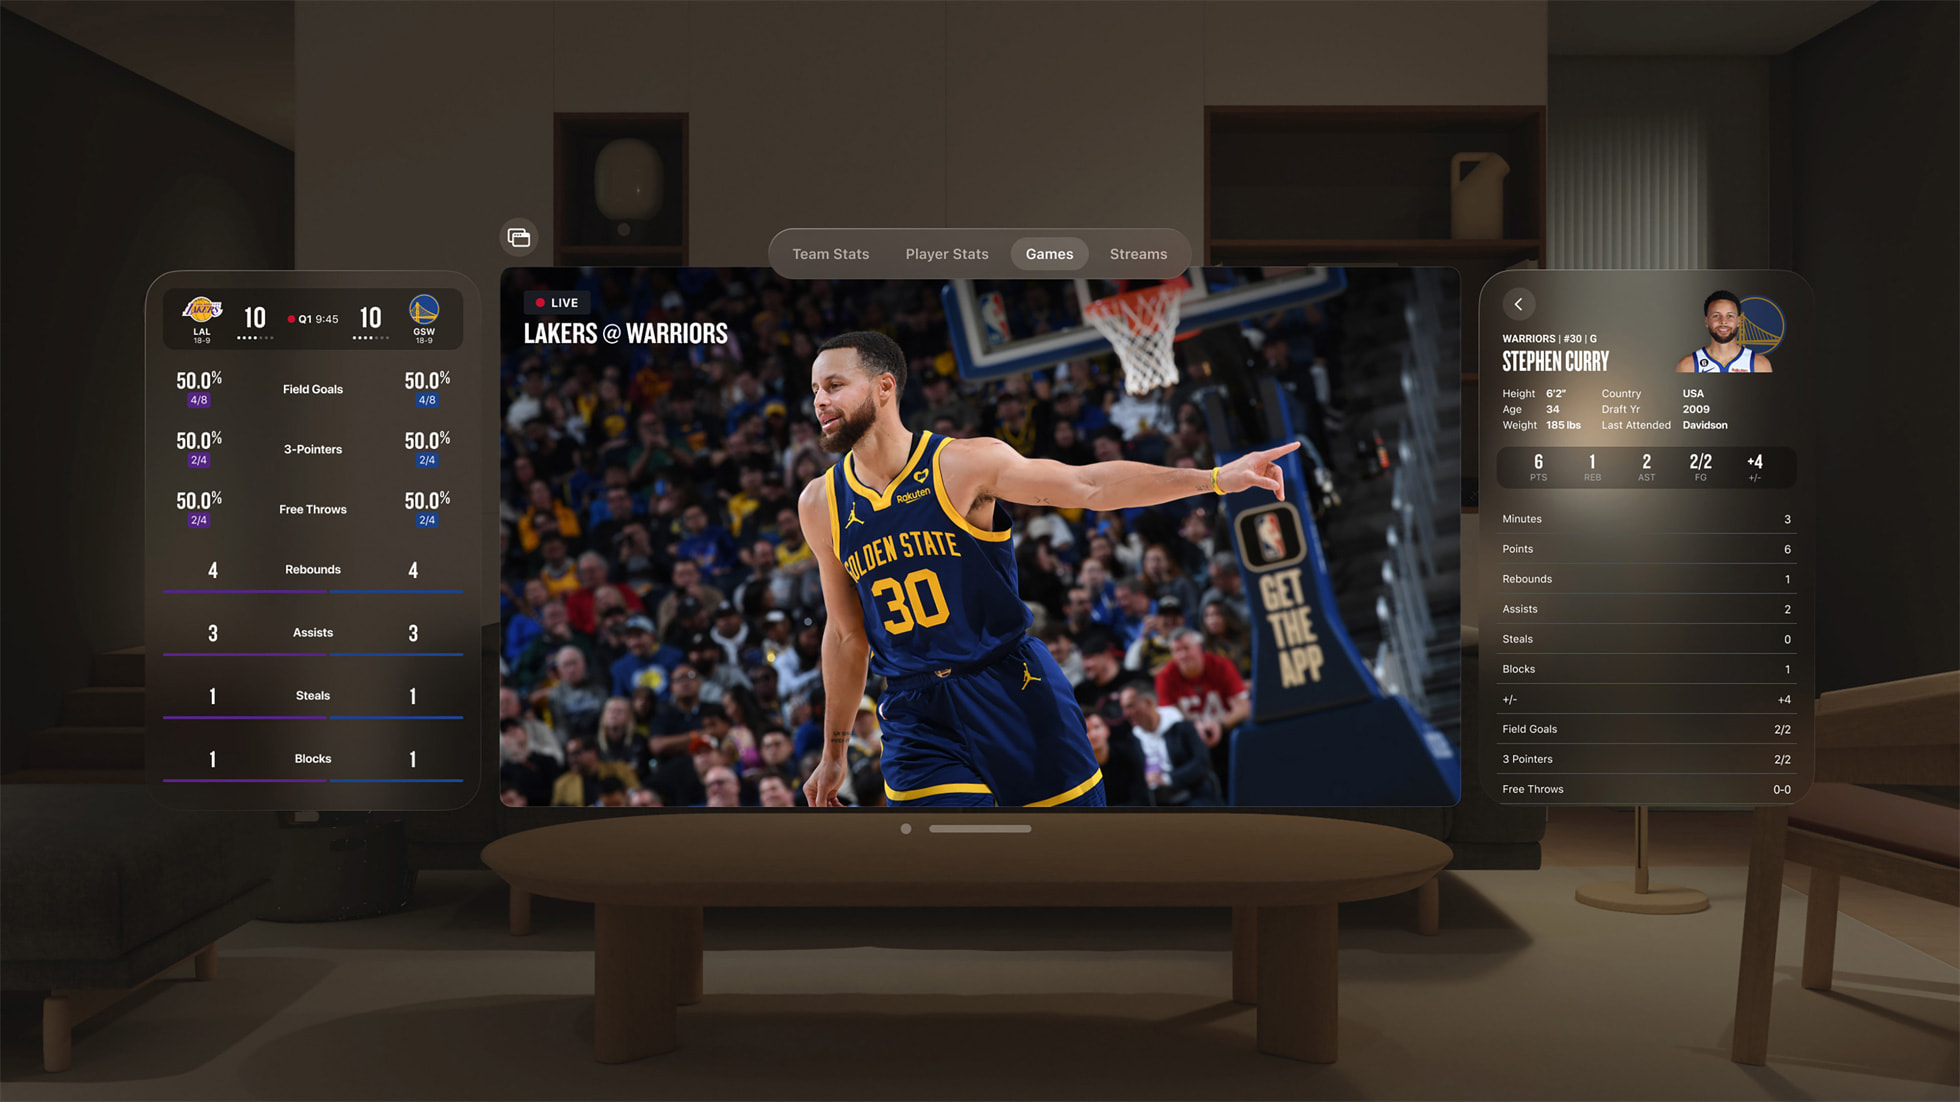 NBA app on Vision Pro showing Steph Curry